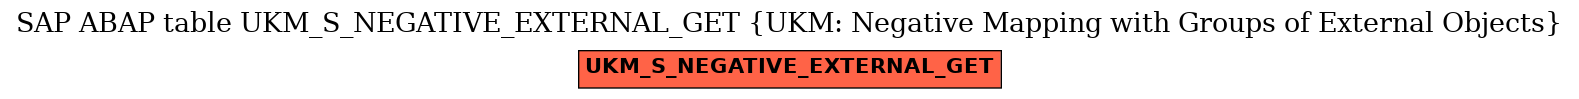 E-R Diagram for table UKM_S_NEGATIVE_EXTERNAL_GET (UKM: Negative Mapping with Groups of External Objects)